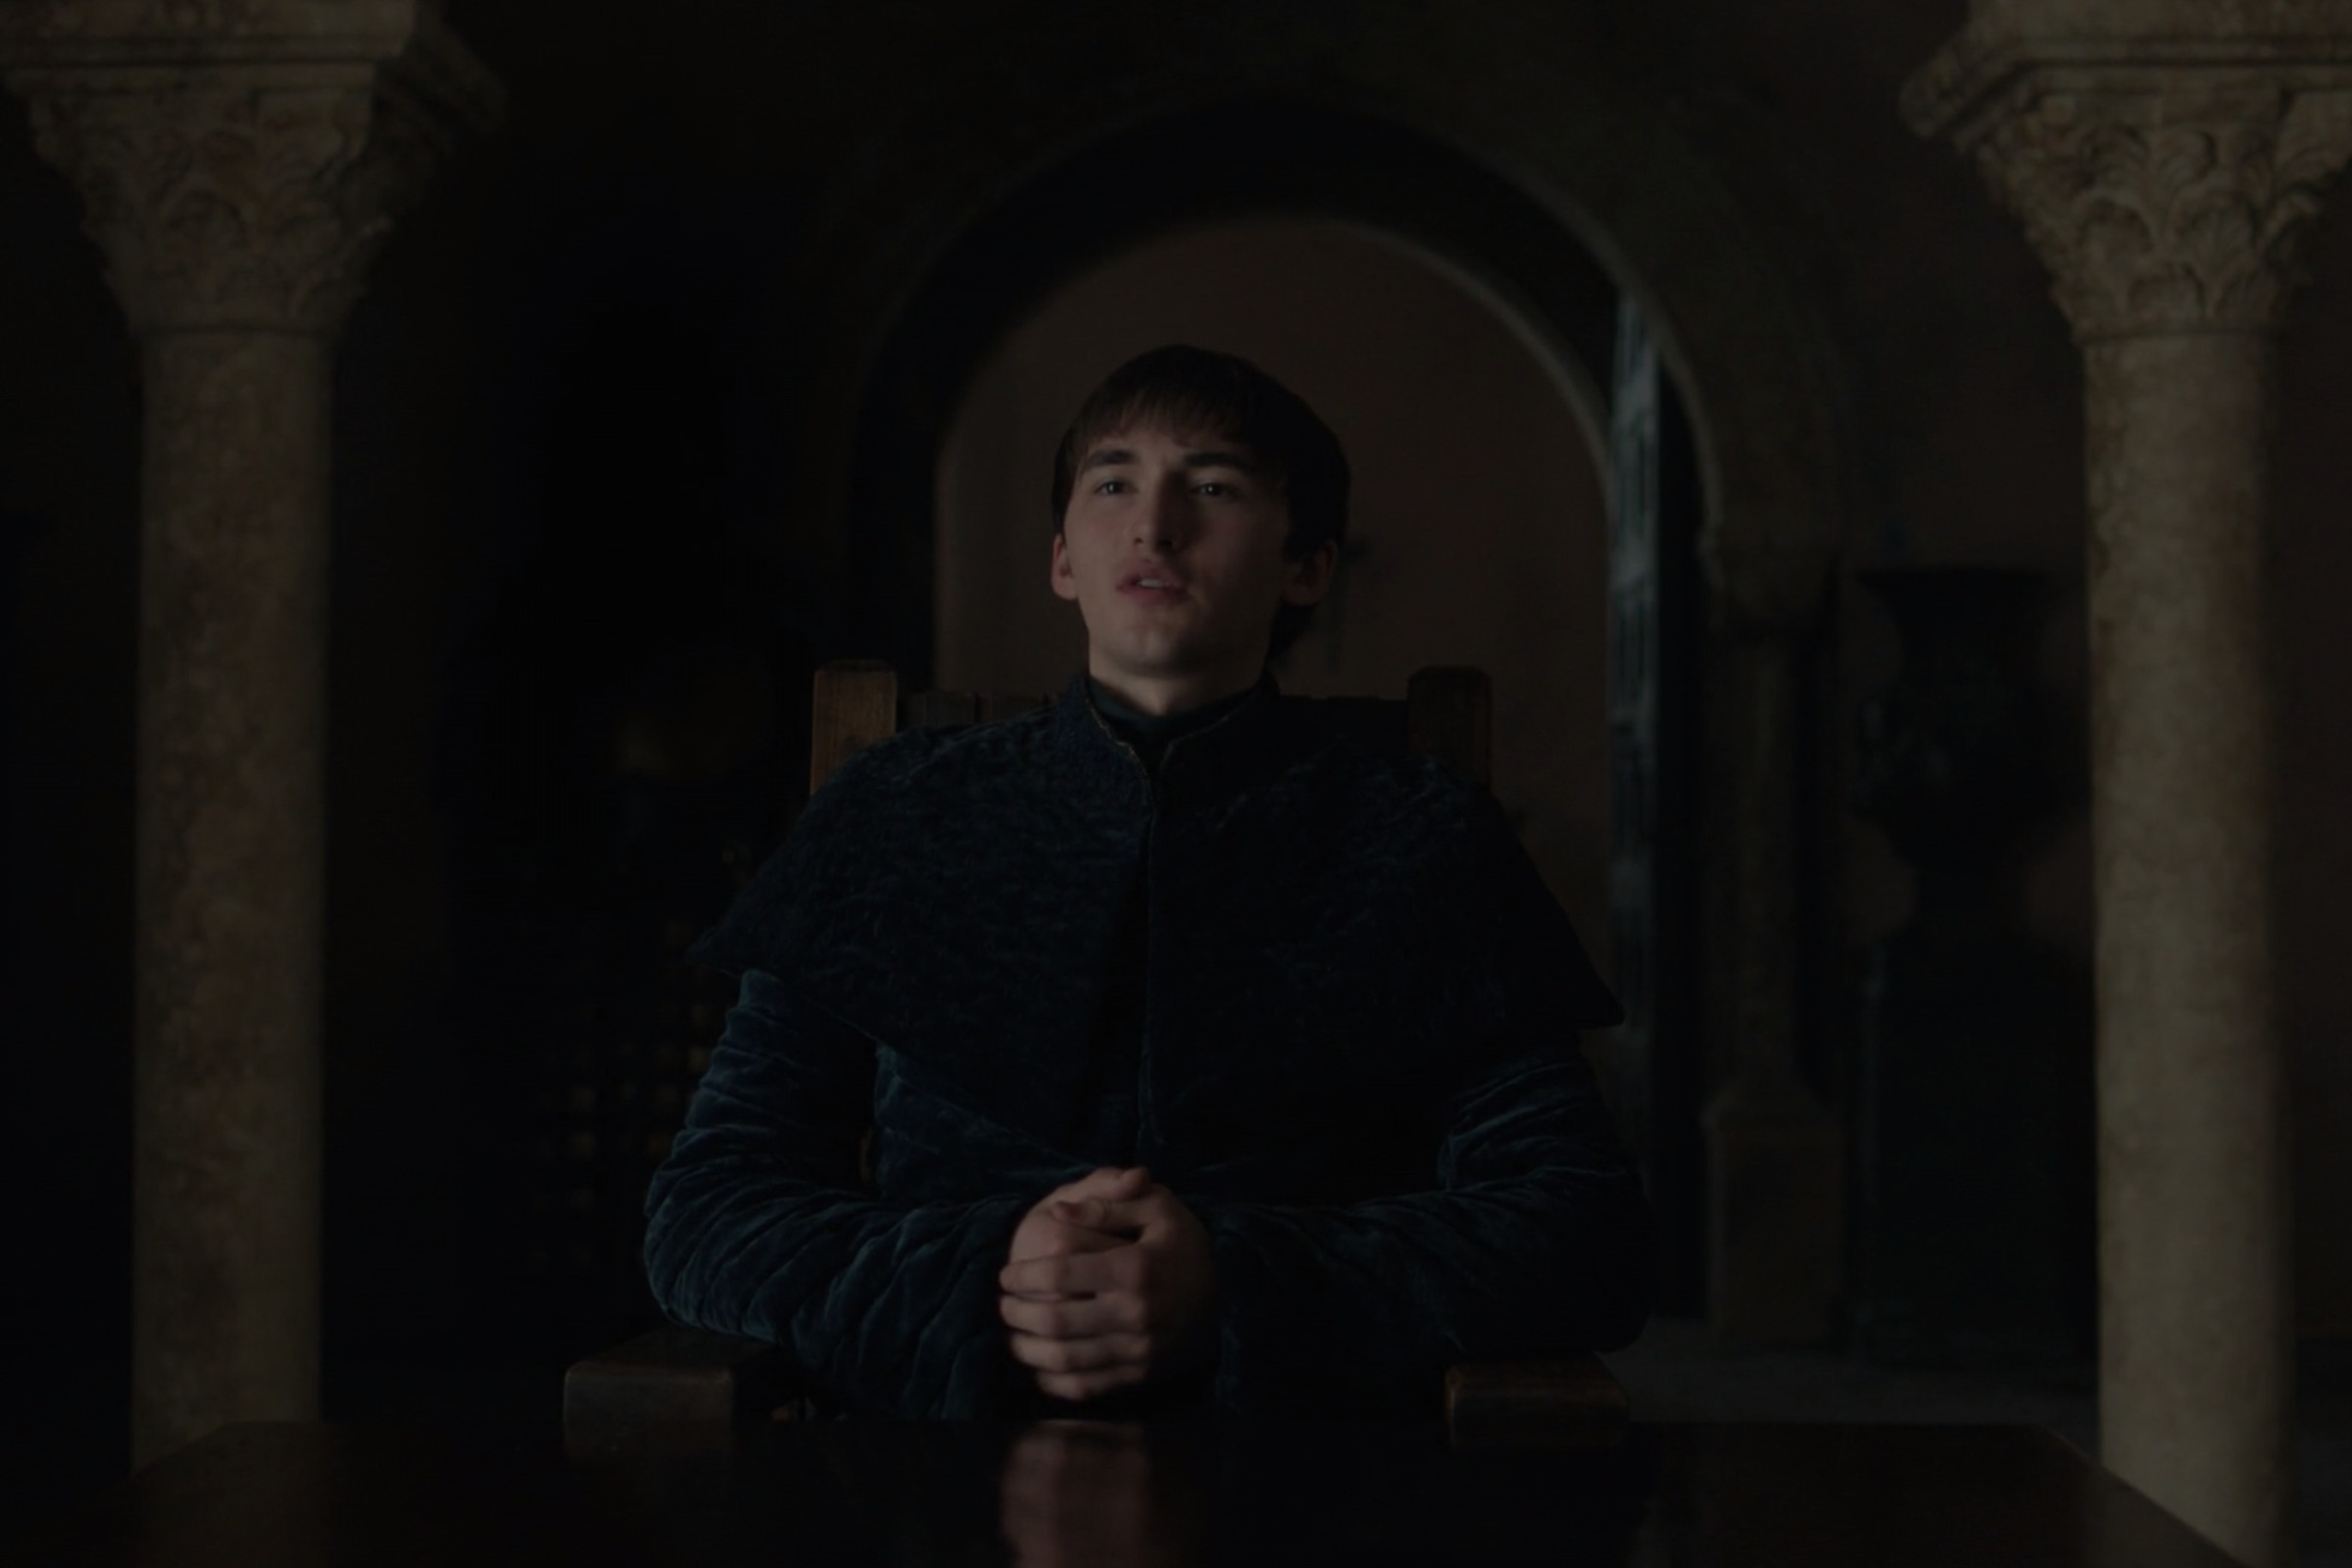 bran stark, who can see everything but lets bad things happen